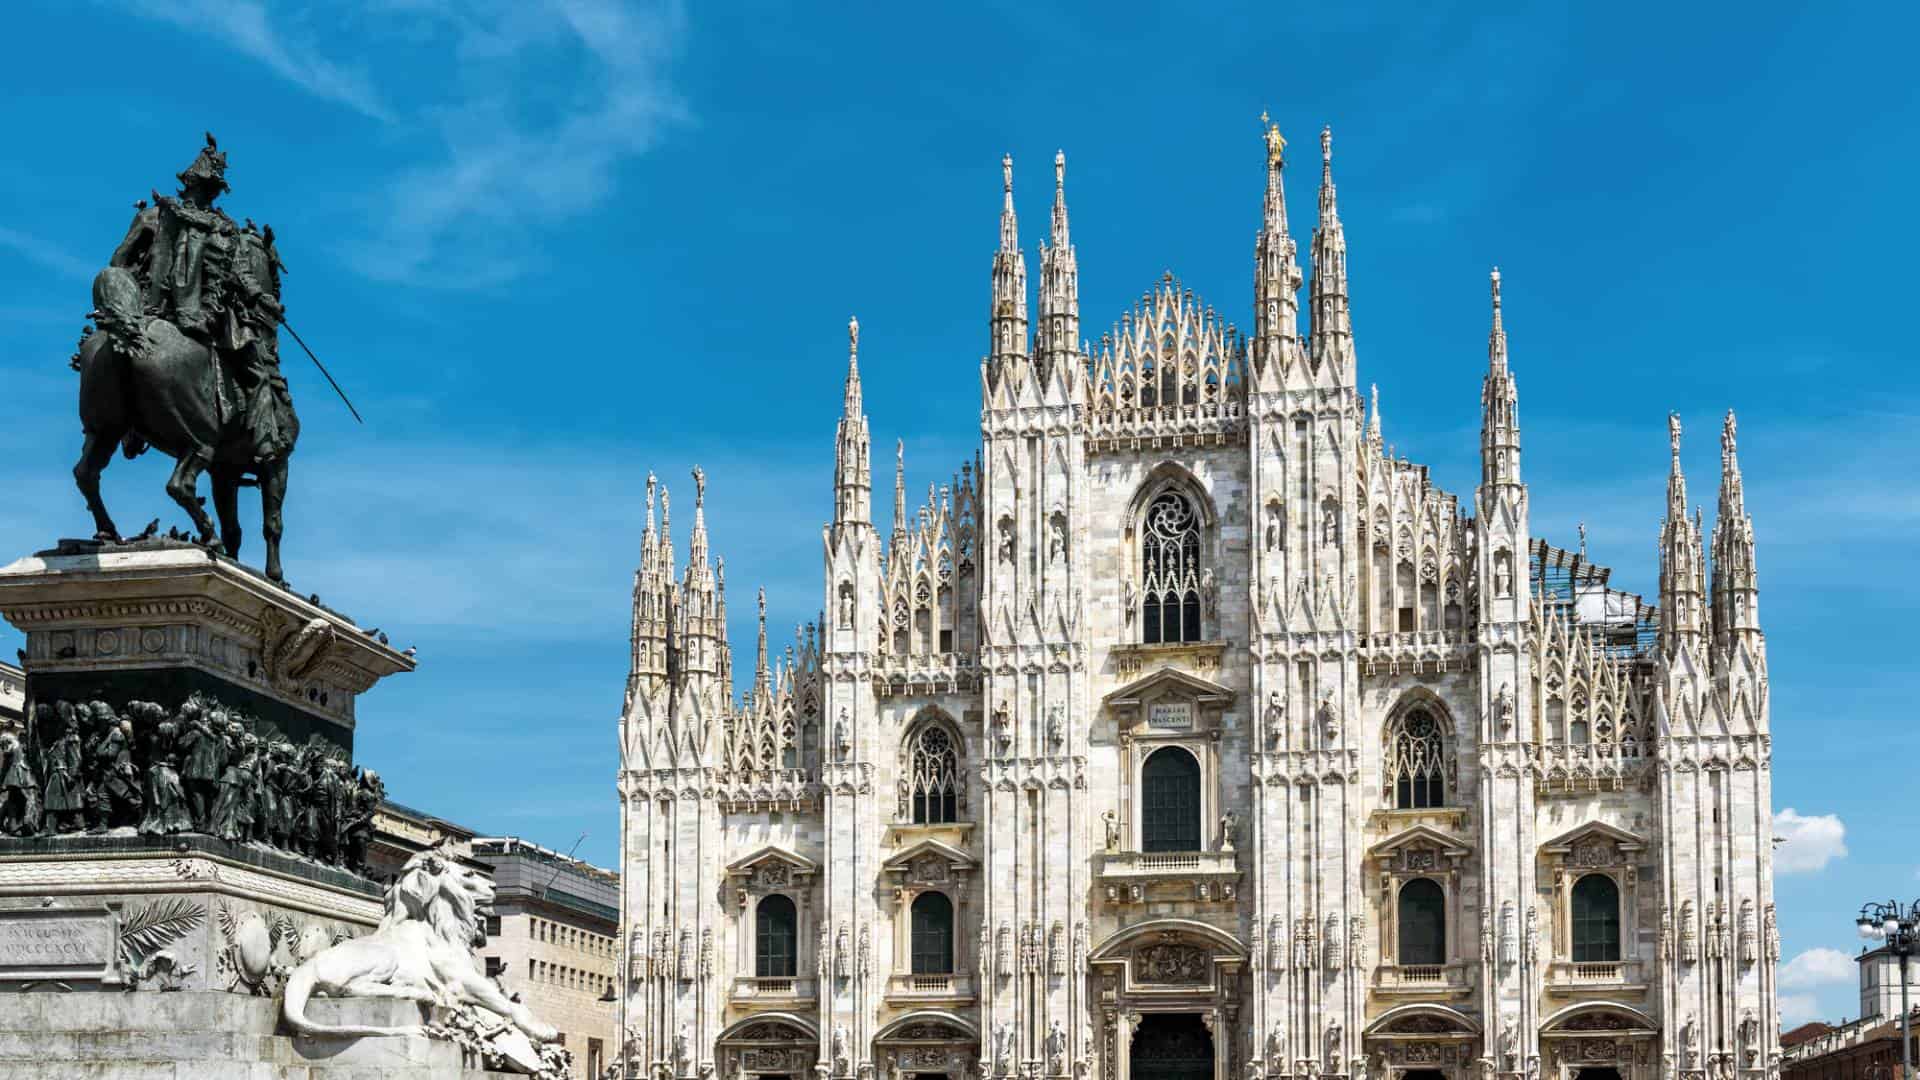 The famous Milan Cathedral (Duomo di Milano) and monument to Victor Emmanuel II on Piazza del Duomo in Milan, Italy.